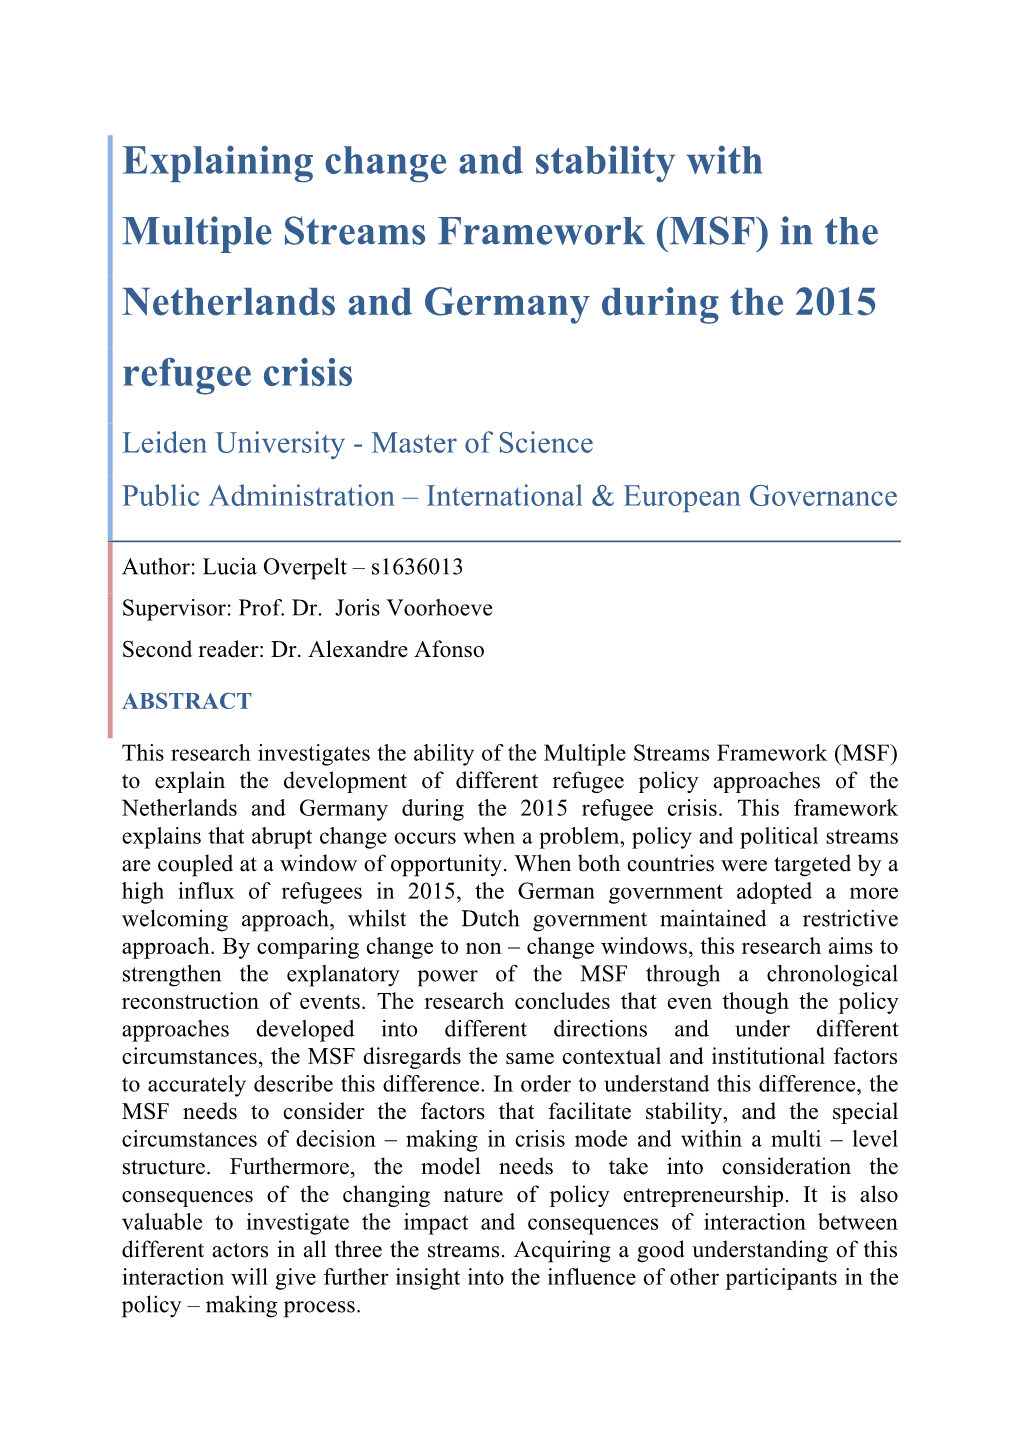 Explaining Change and Stability with Multiple Streams Framework (MSF) in the Netherlands and Germany During the 2015 Refugee Crisis